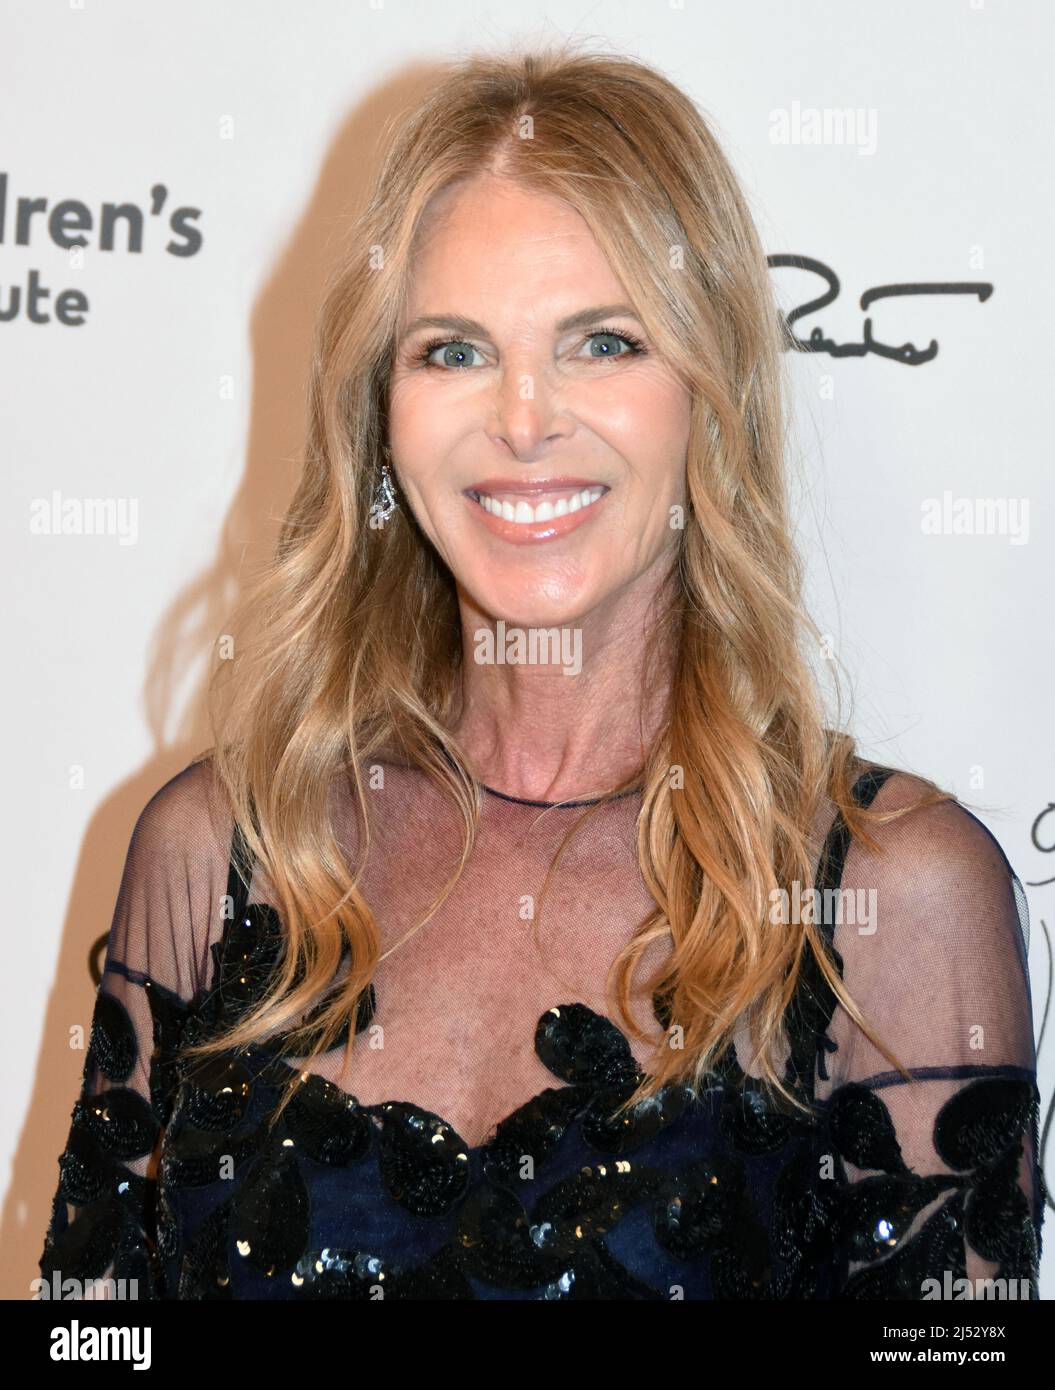 Beverly Hills, California, USA 19th April 2022 Actress Catherine Oxenberg attends Colleagues Spring Luncheon and Oscar de la Renta Fashion Show at The Beverly Wilshire Hotel on April 19, 2022 in Beverly Hills, California, USA. Photo by Barry King/Alamy Live News Stock Photo